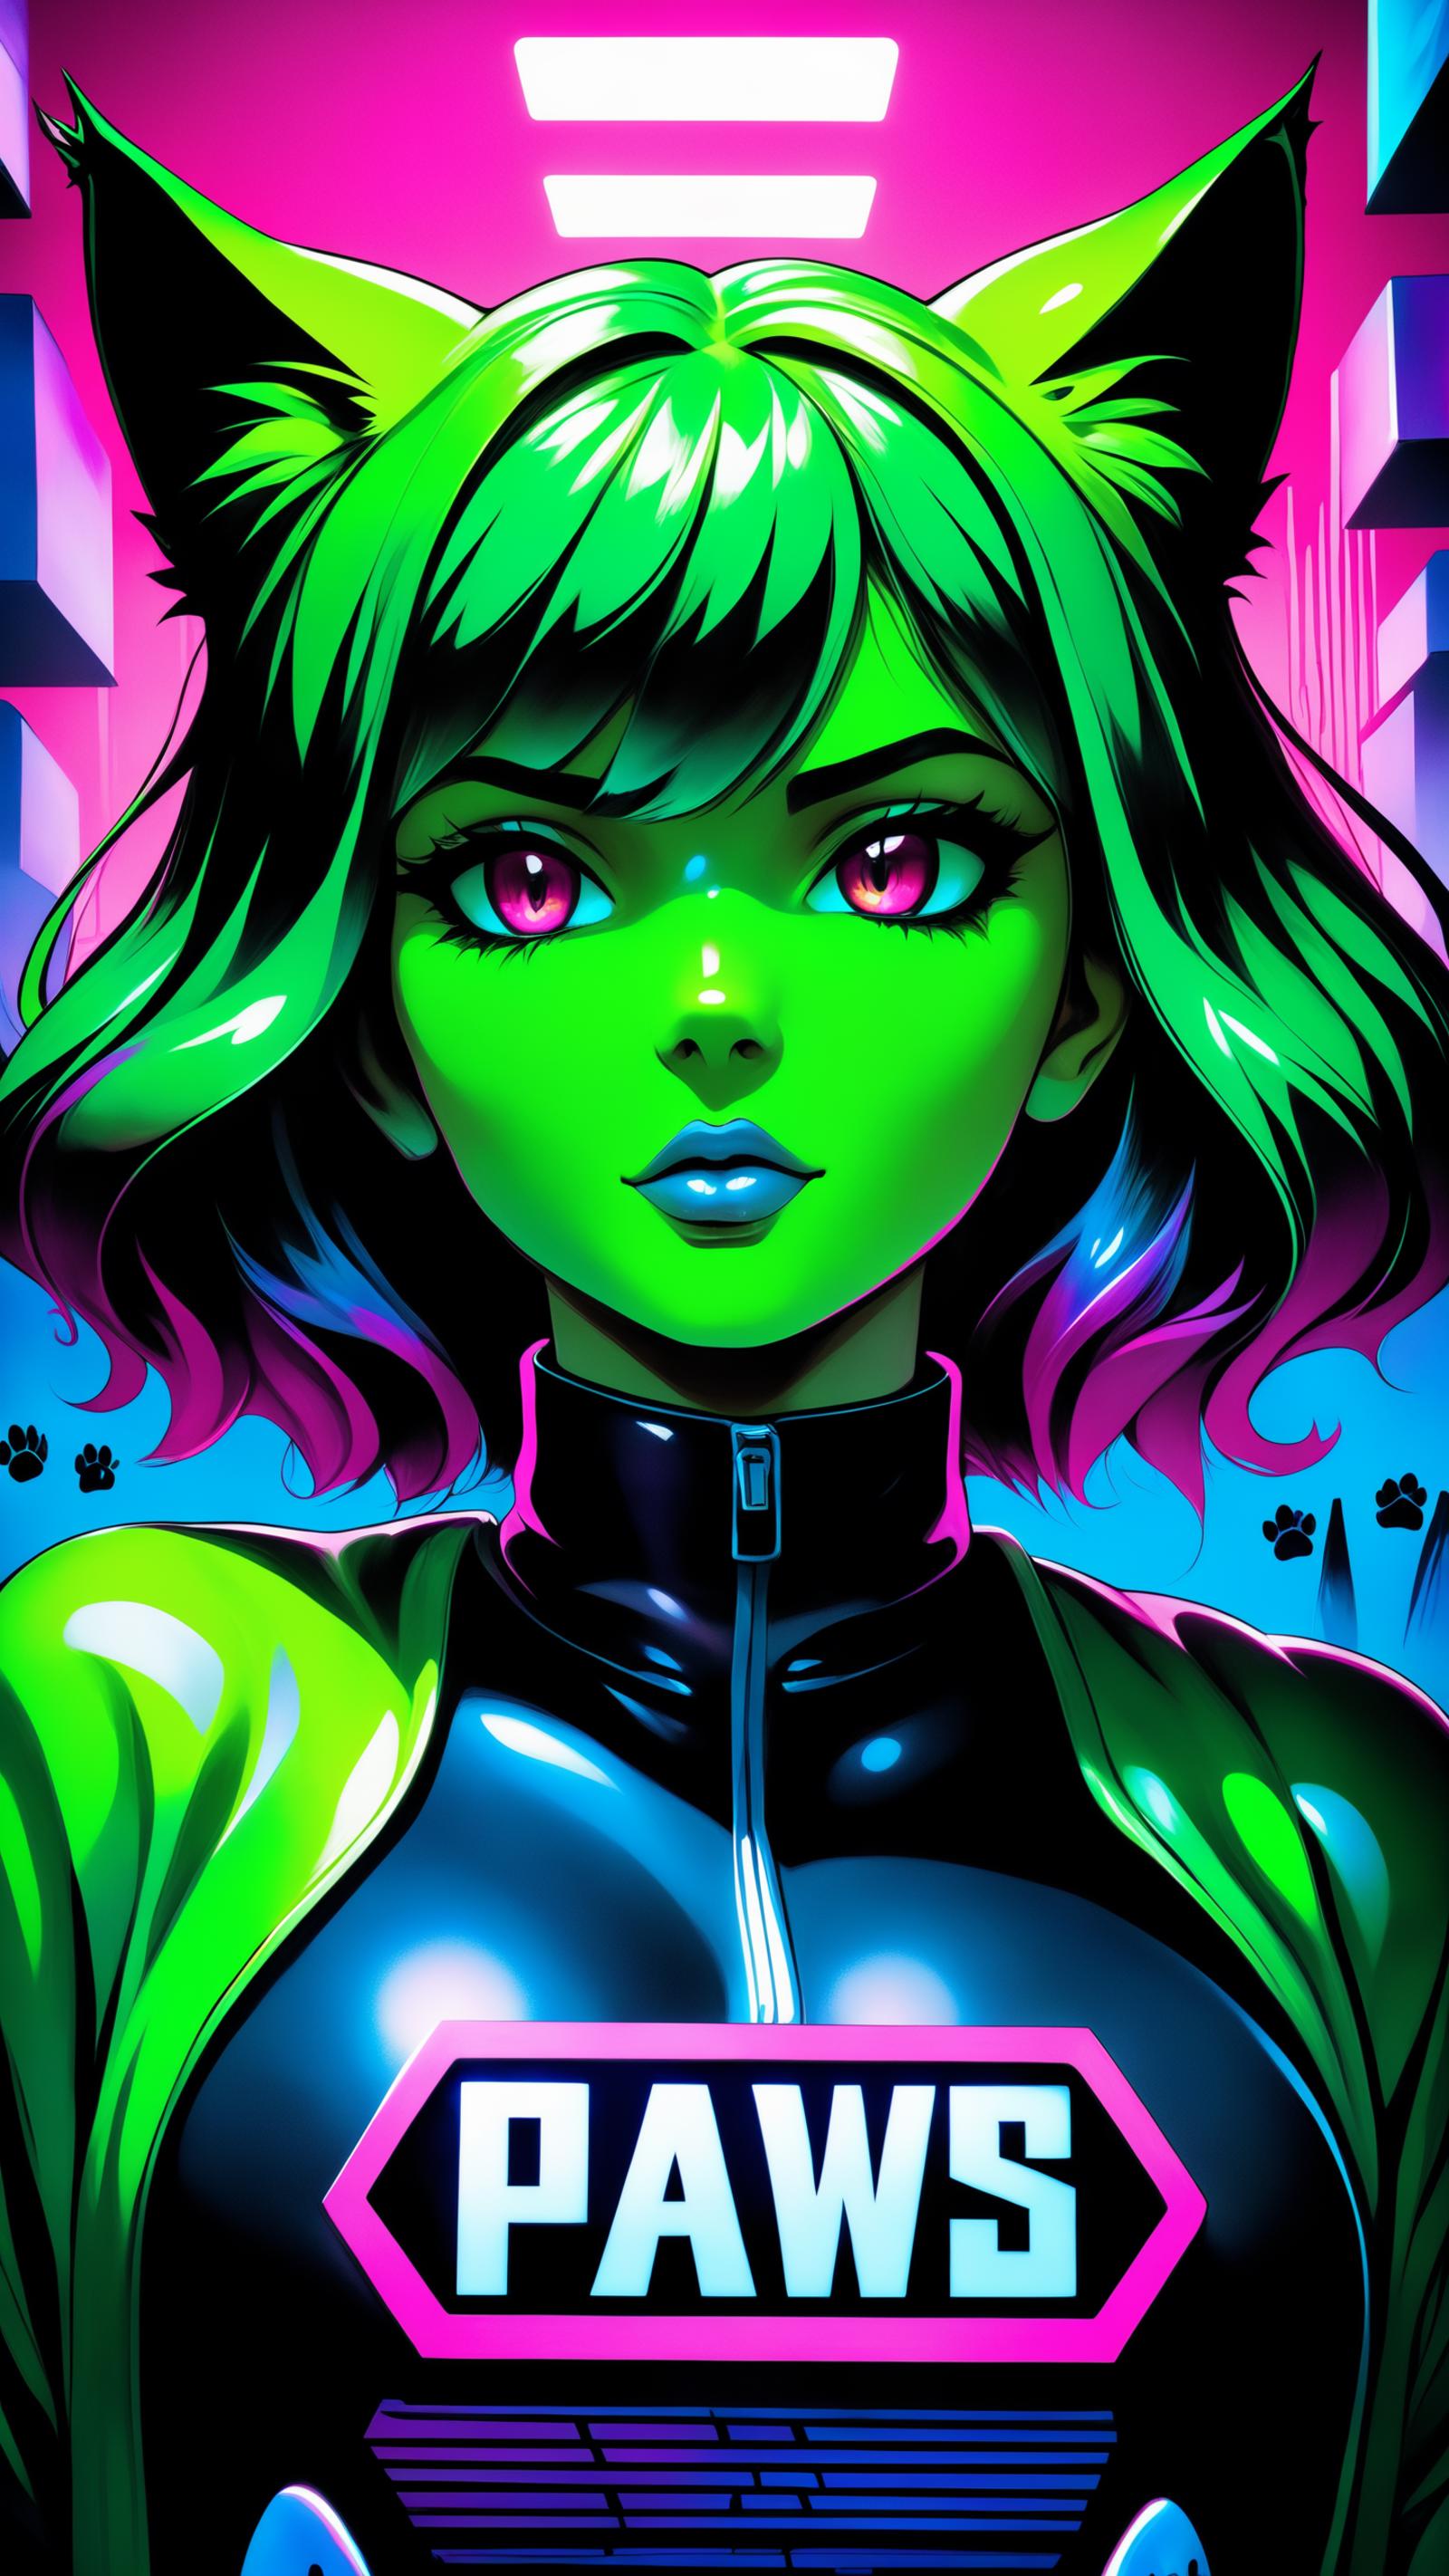 A colorful digital illustration of a female character with green hair and a black leather jacket.